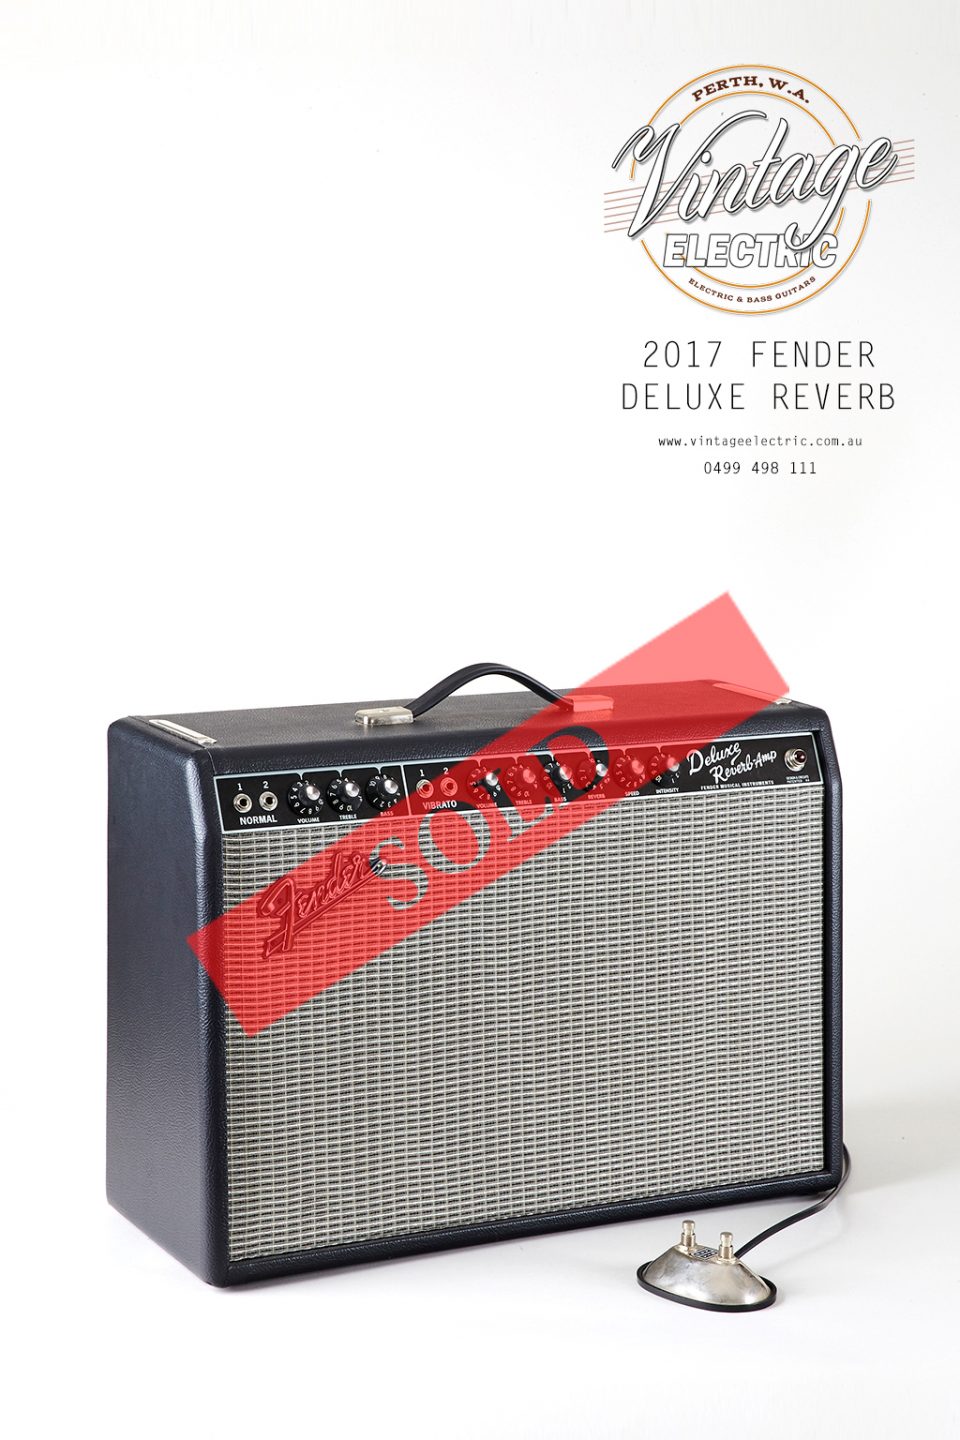 2017 Fender Deluxe Reverb Large SOLD